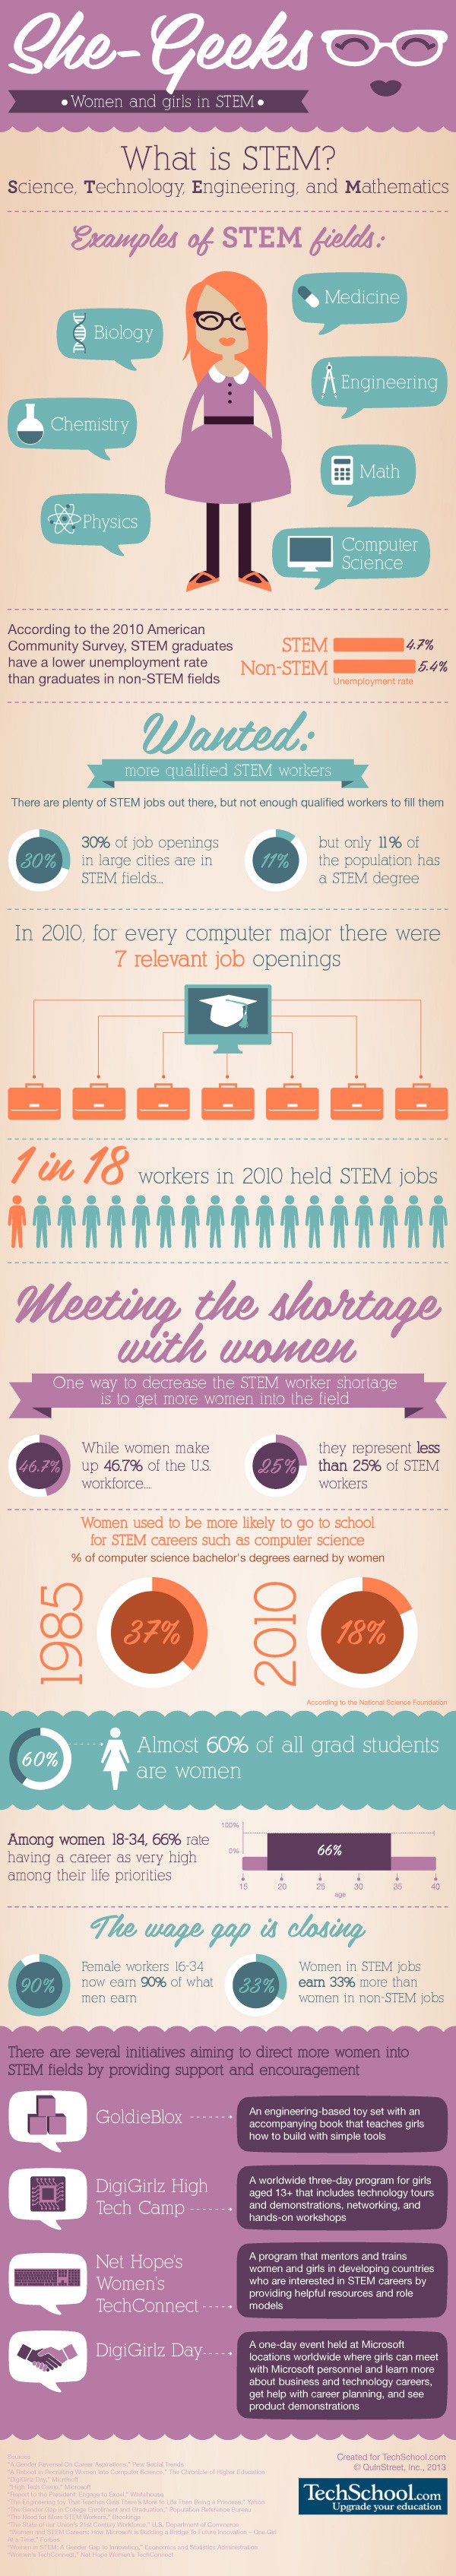 She-Geeks infographic